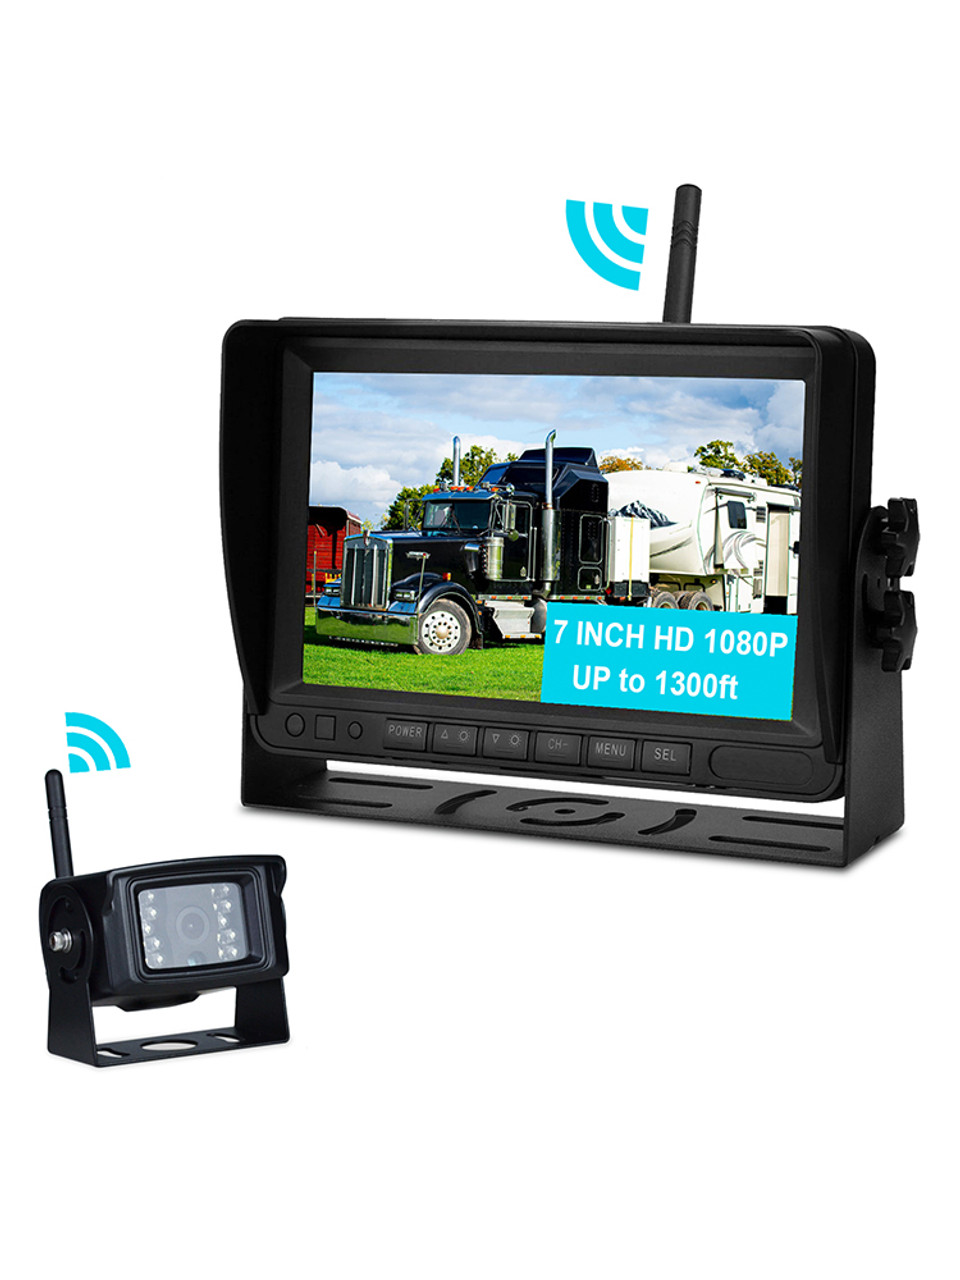 7" Display AHD 1080P Wireless 1CH Rear View Backup Camera Kit for Truck Trailer